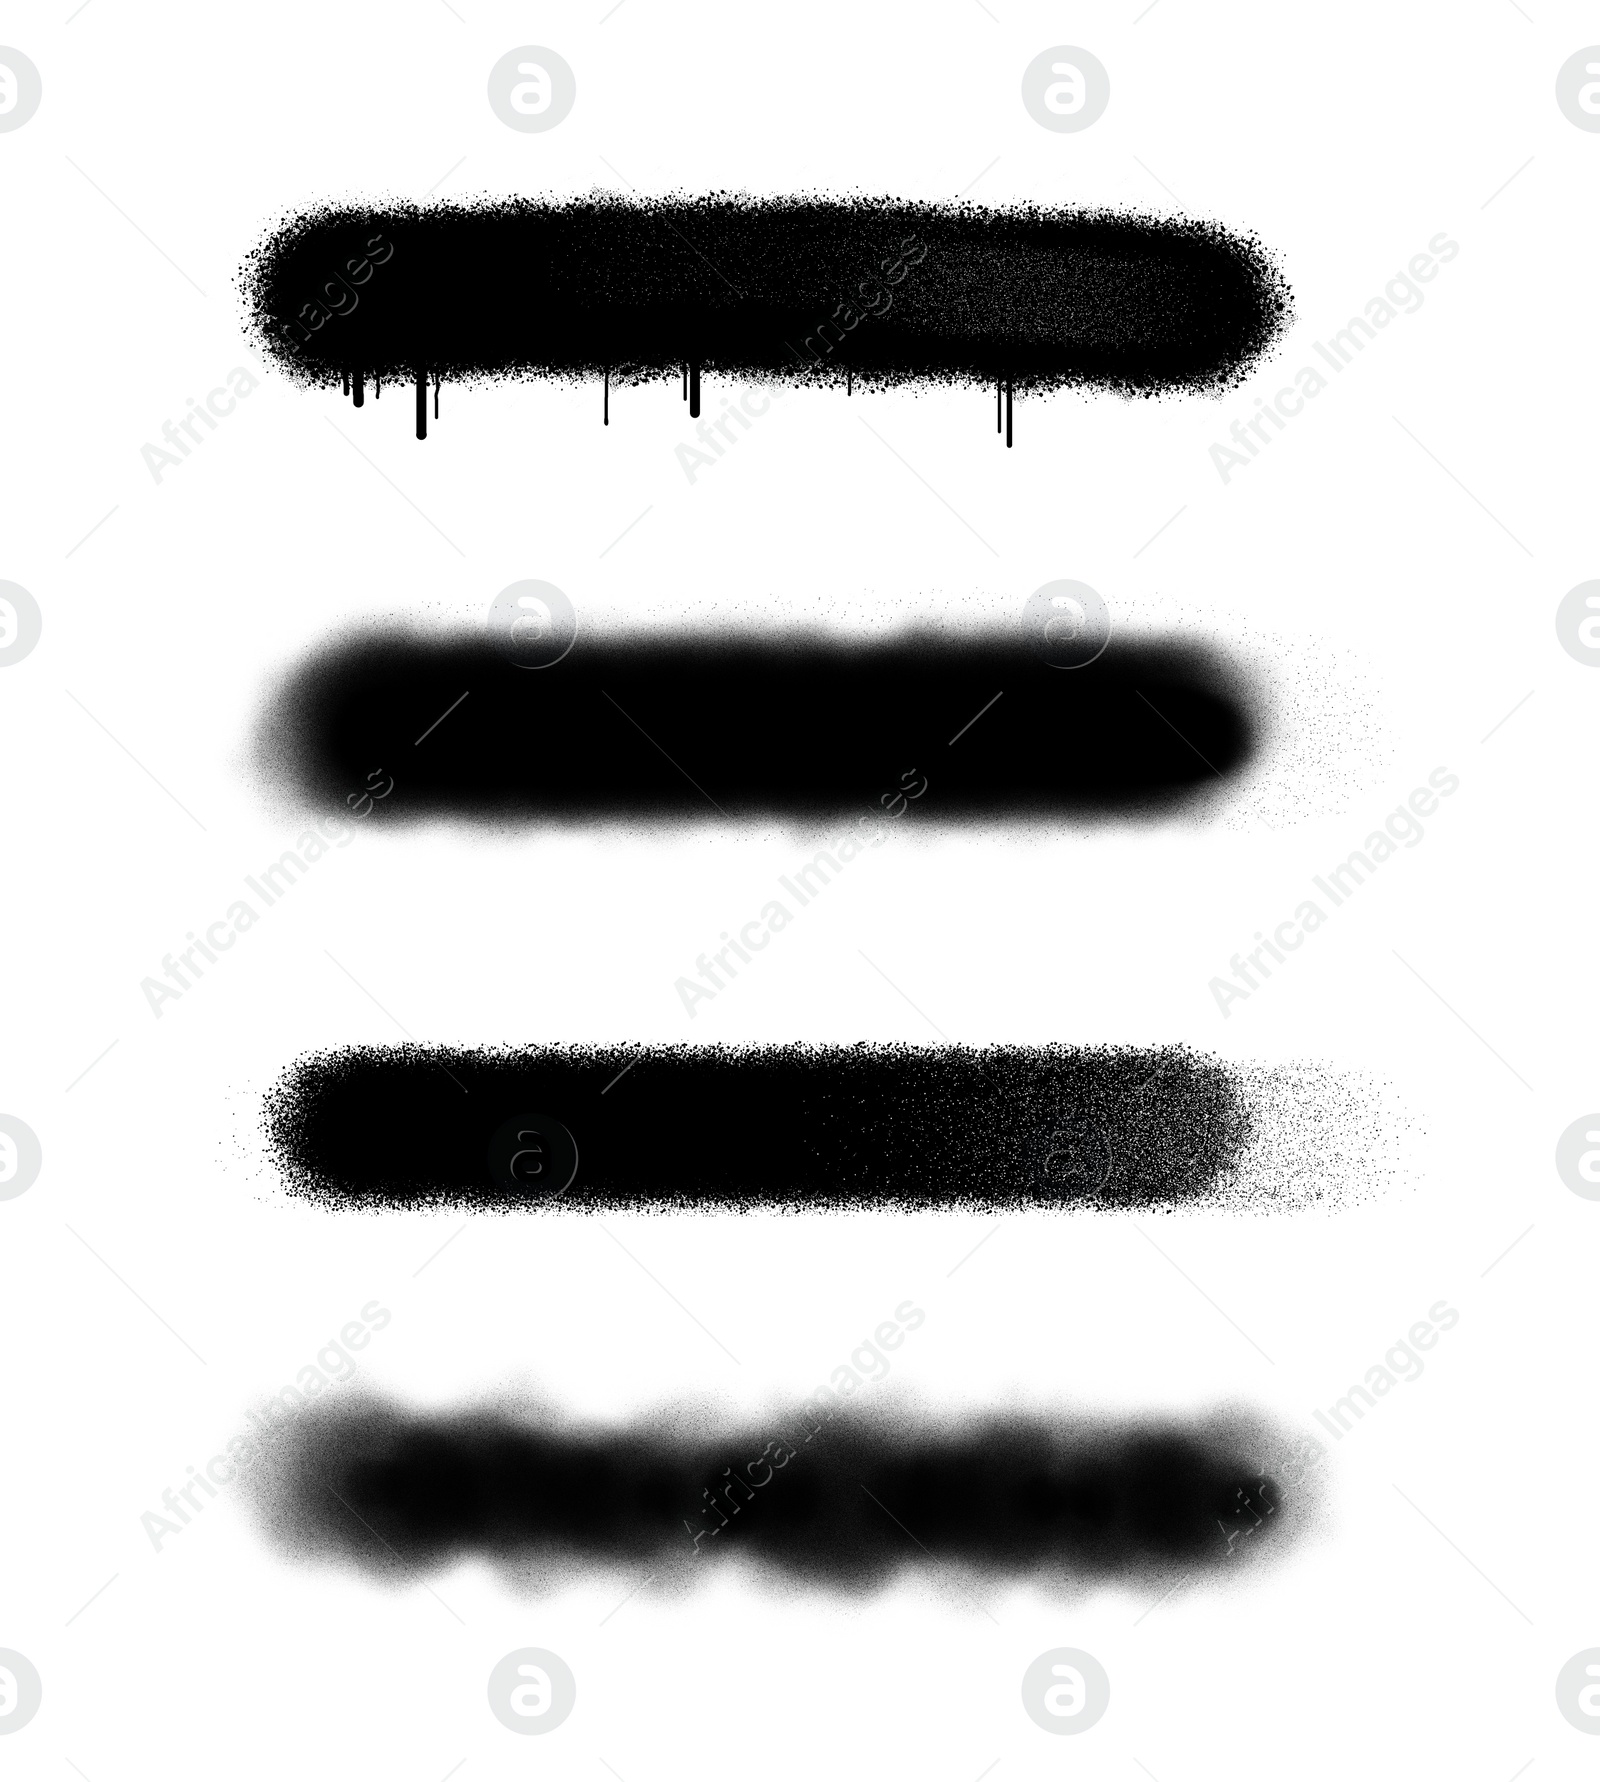 Illustration of Lines drawn by black spray paint on white background